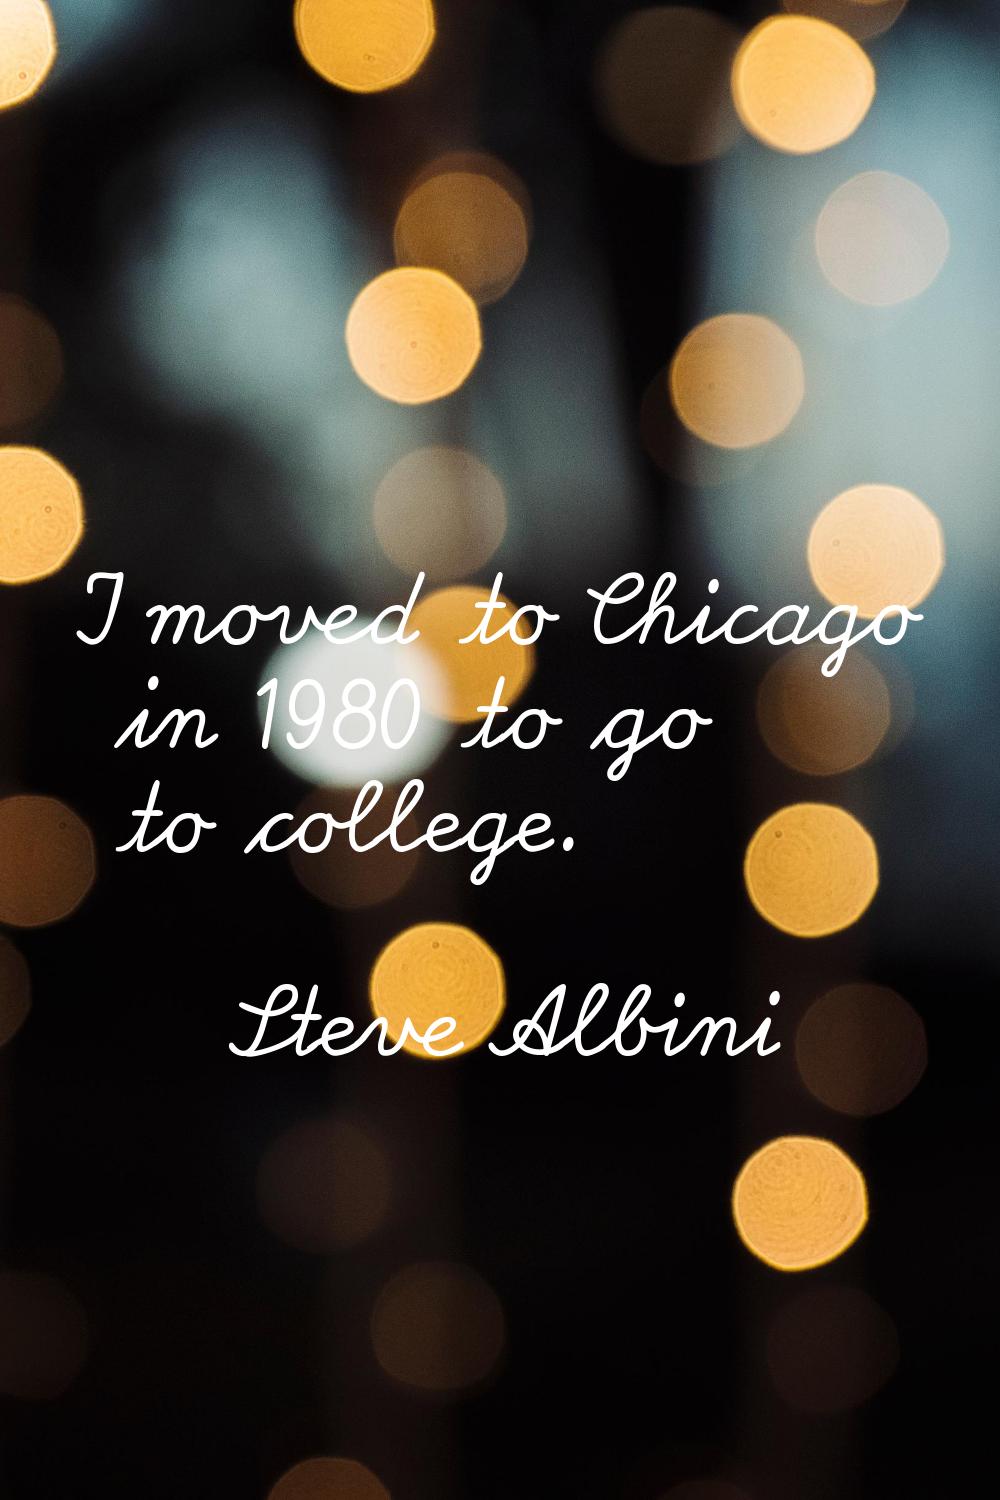 I moved to Chicago in 1980 to go to college.